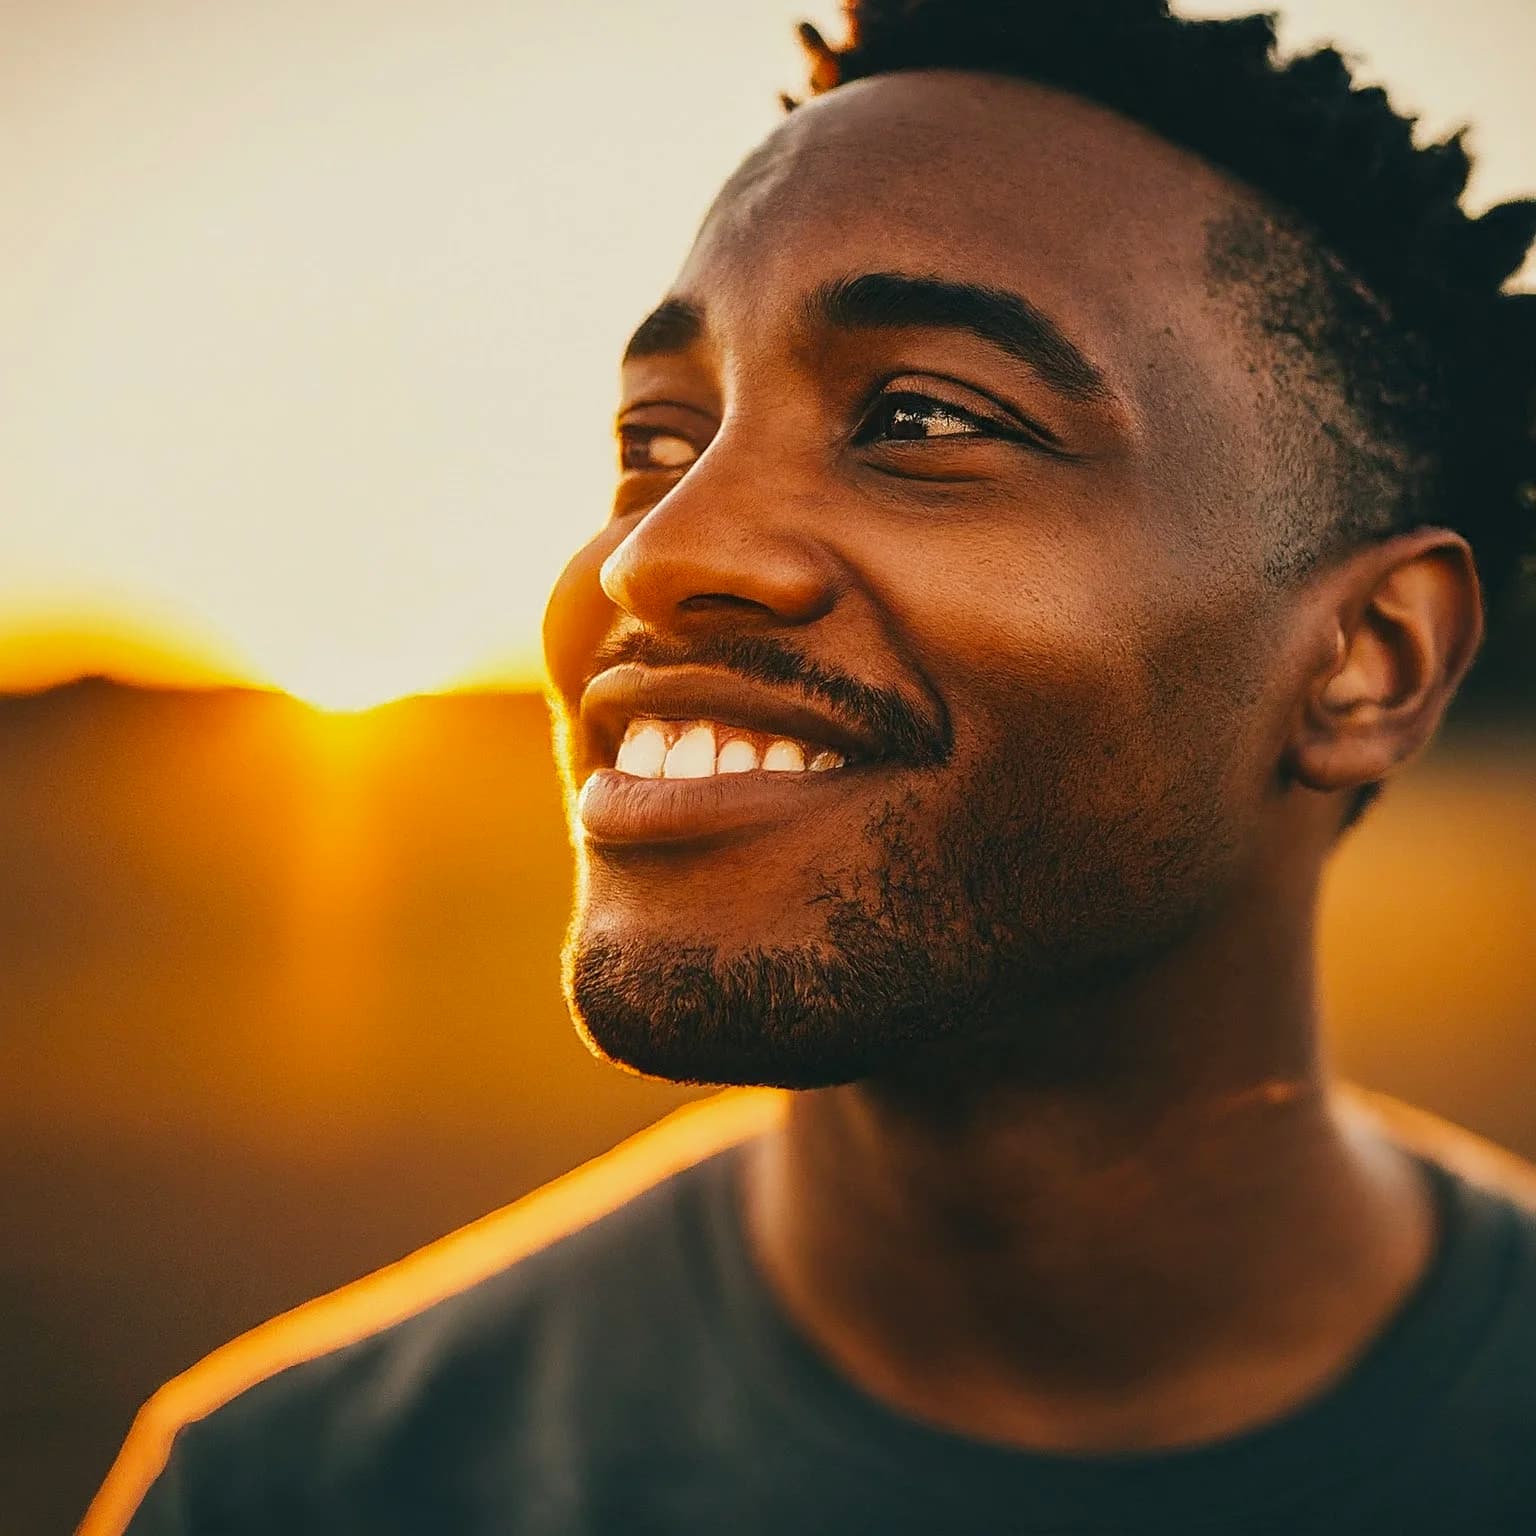 Prompt: “Generate a realistic photo of a person looking off camera during sunset. Portrait mode so the background is faded.”